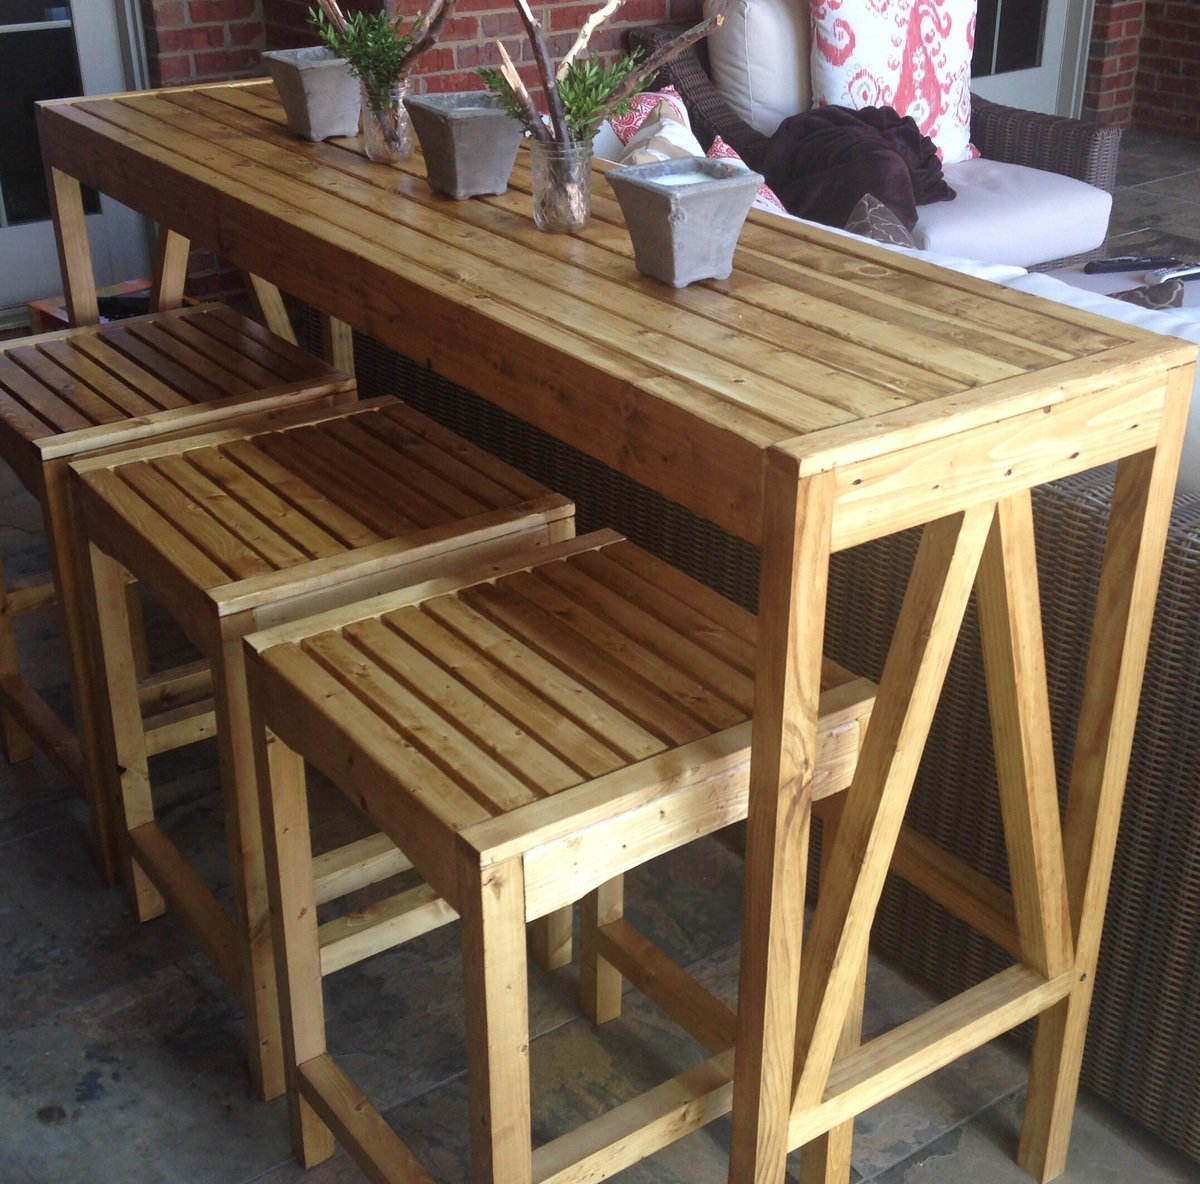 Ana White | Sutton Custom Outdoor Bar Stools - DIY Projects